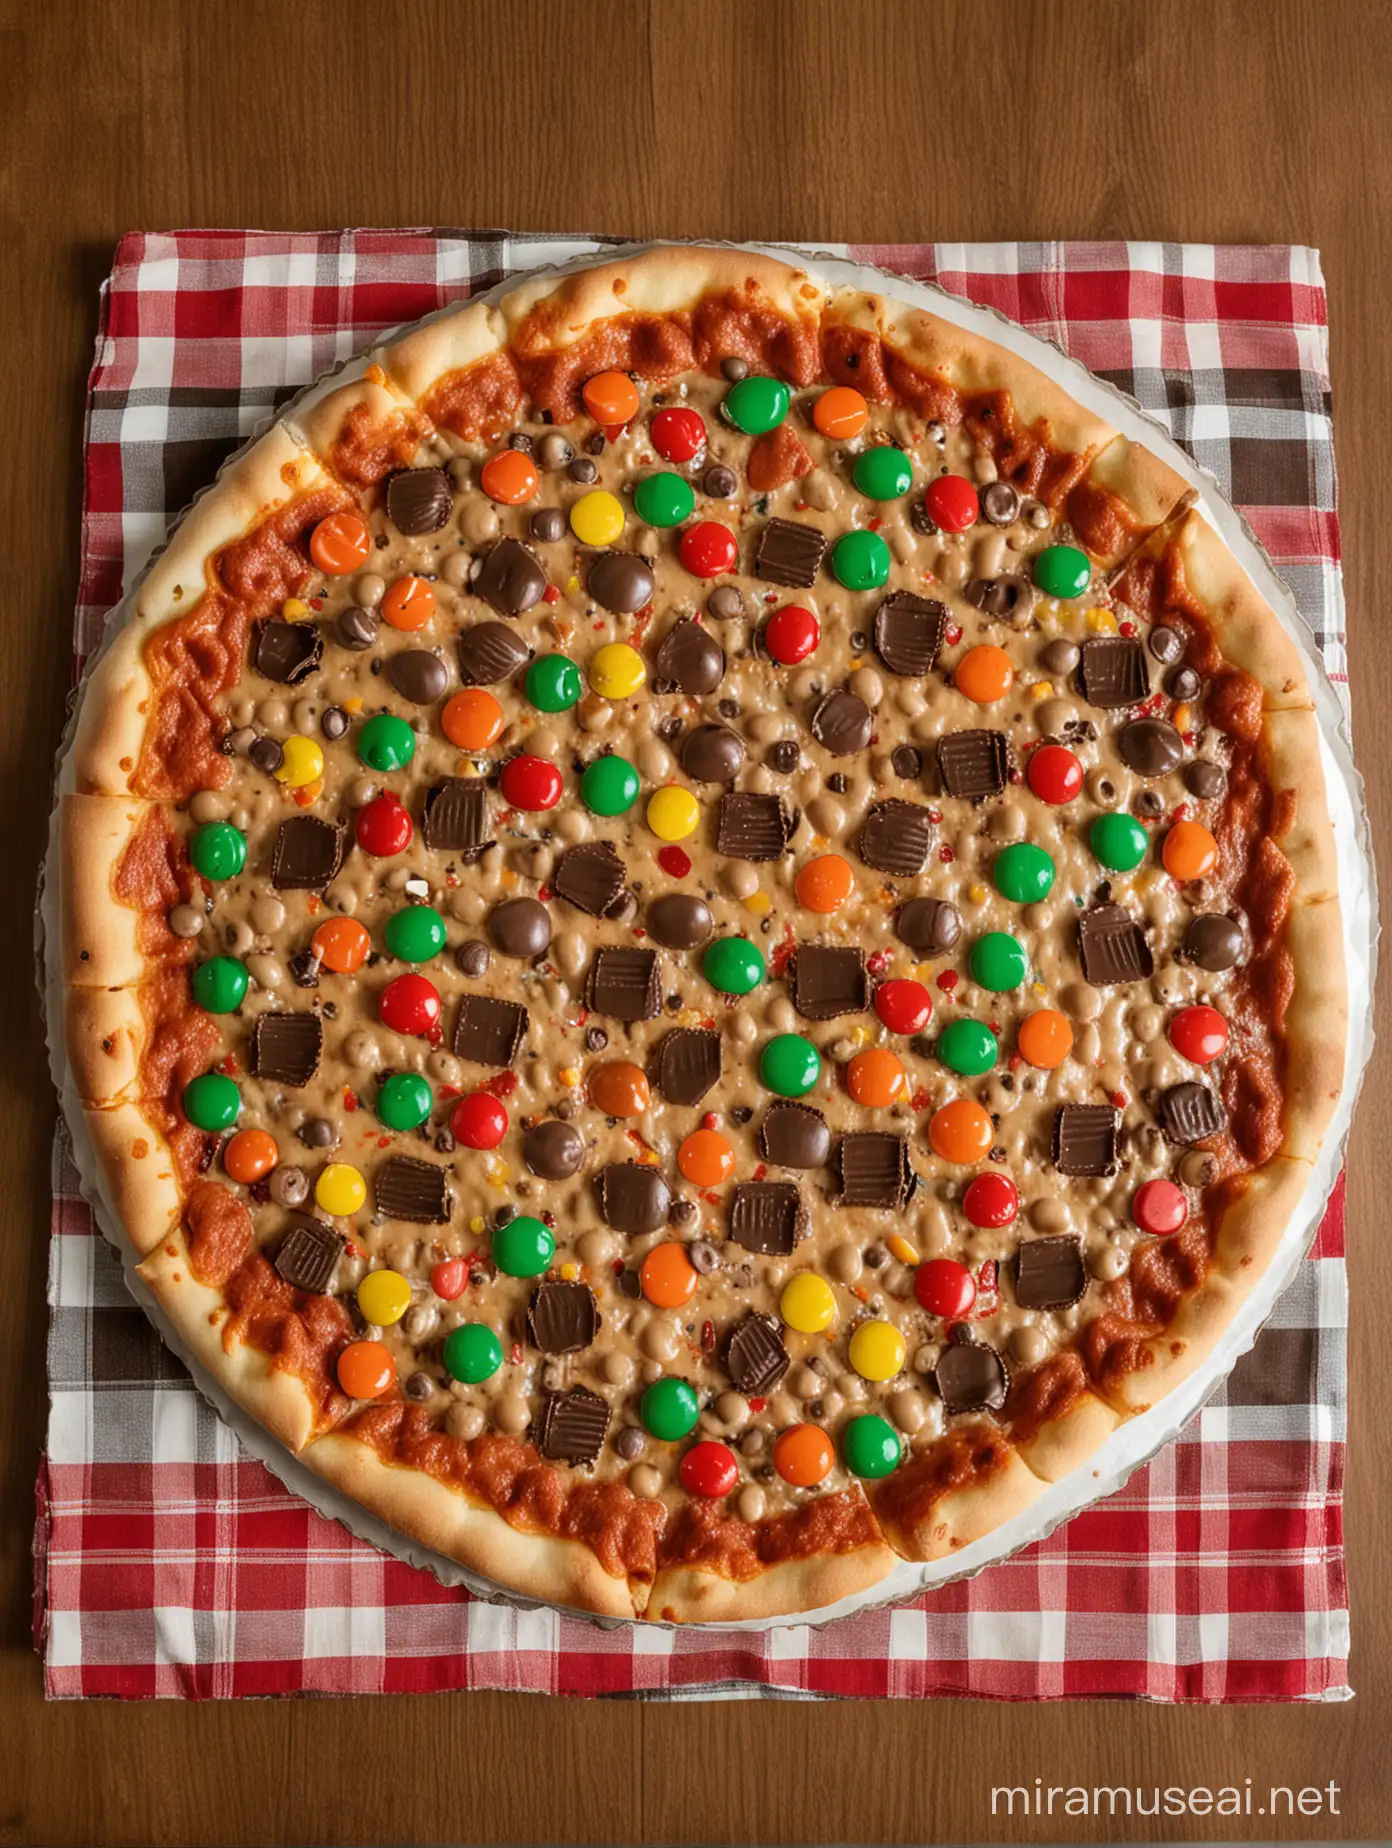 Chocolate Candy Topped Pizza on Checkered Tablecloth